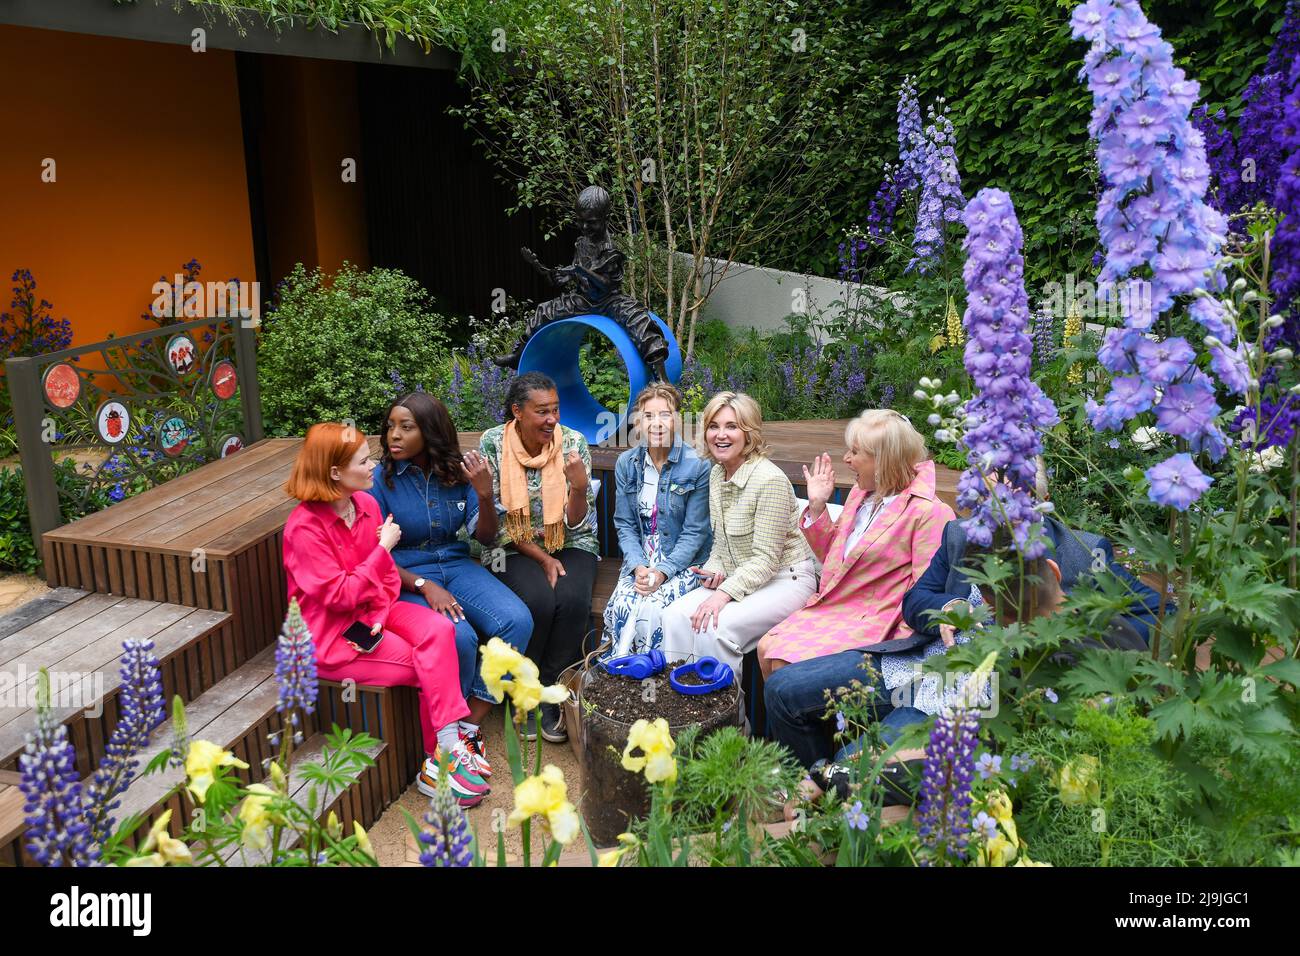 Chelsea Flower Show is back after three years due to the pandemic. It looks fantastic with all the gardens and flower displays. A floral feast for the eyes. These photos were taken during the press day. Photo : Blue Peter Presenters - Valerie Singleton, Anthea Turner, Tim Vincent, Janet Ellis, Lindsey Russell, Katie Mill, Sarah Greene Stock Photo